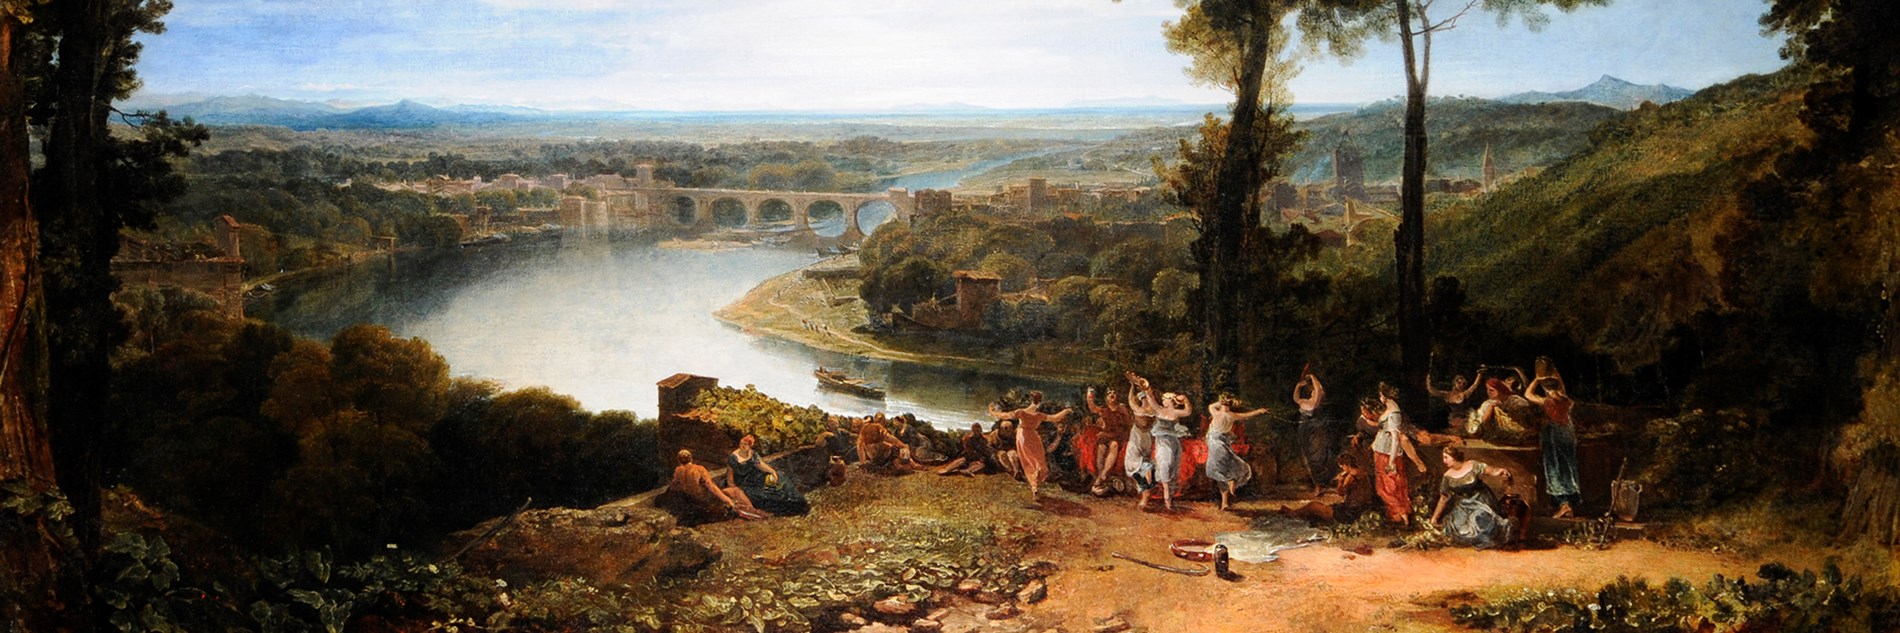 An oil painting of a rural landscape on a sunny day. In the foreground figures dance and celebrate on a hillside.  In the background there is a river, trees, buildings and a bridge, with mountains in the distance. 